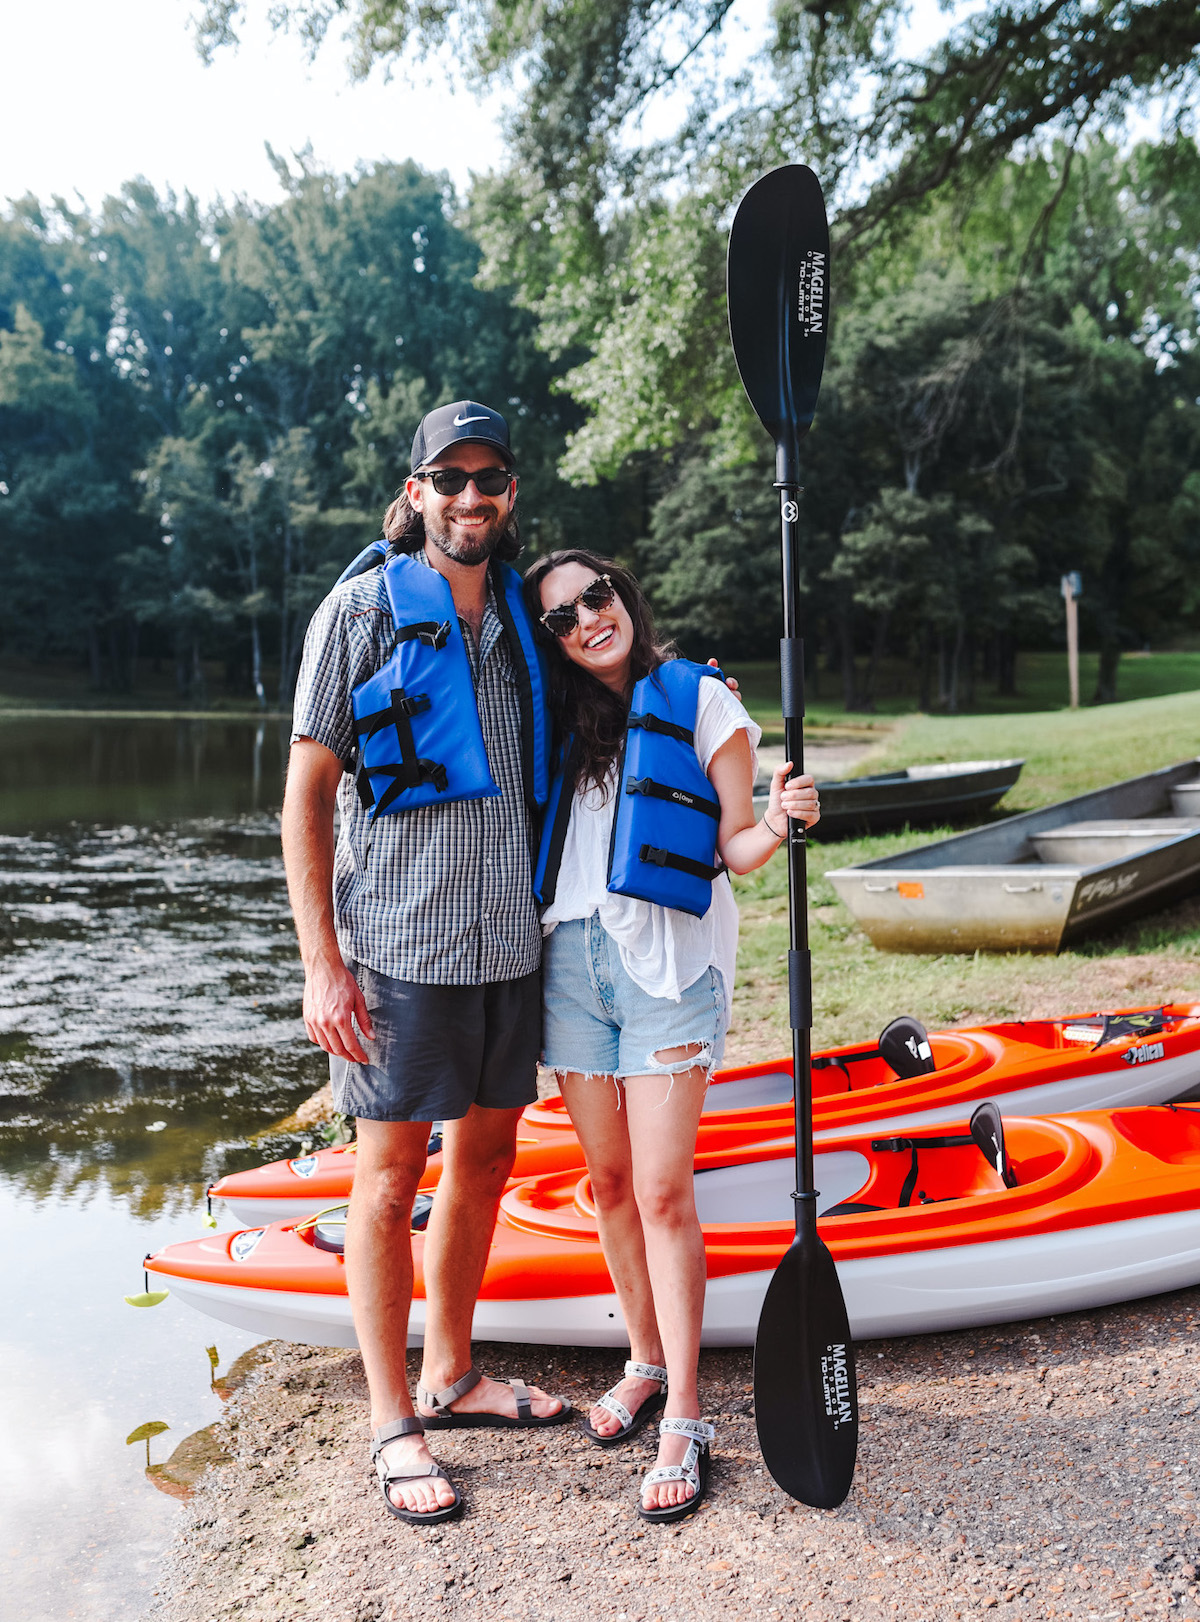 Kayaking for Beginners by poplar Memphis lifestyle blog, Lone Star Looking Glass: image of a husband and wife standing together and wearing blue lifejackets while standing next to some red kayaks. 